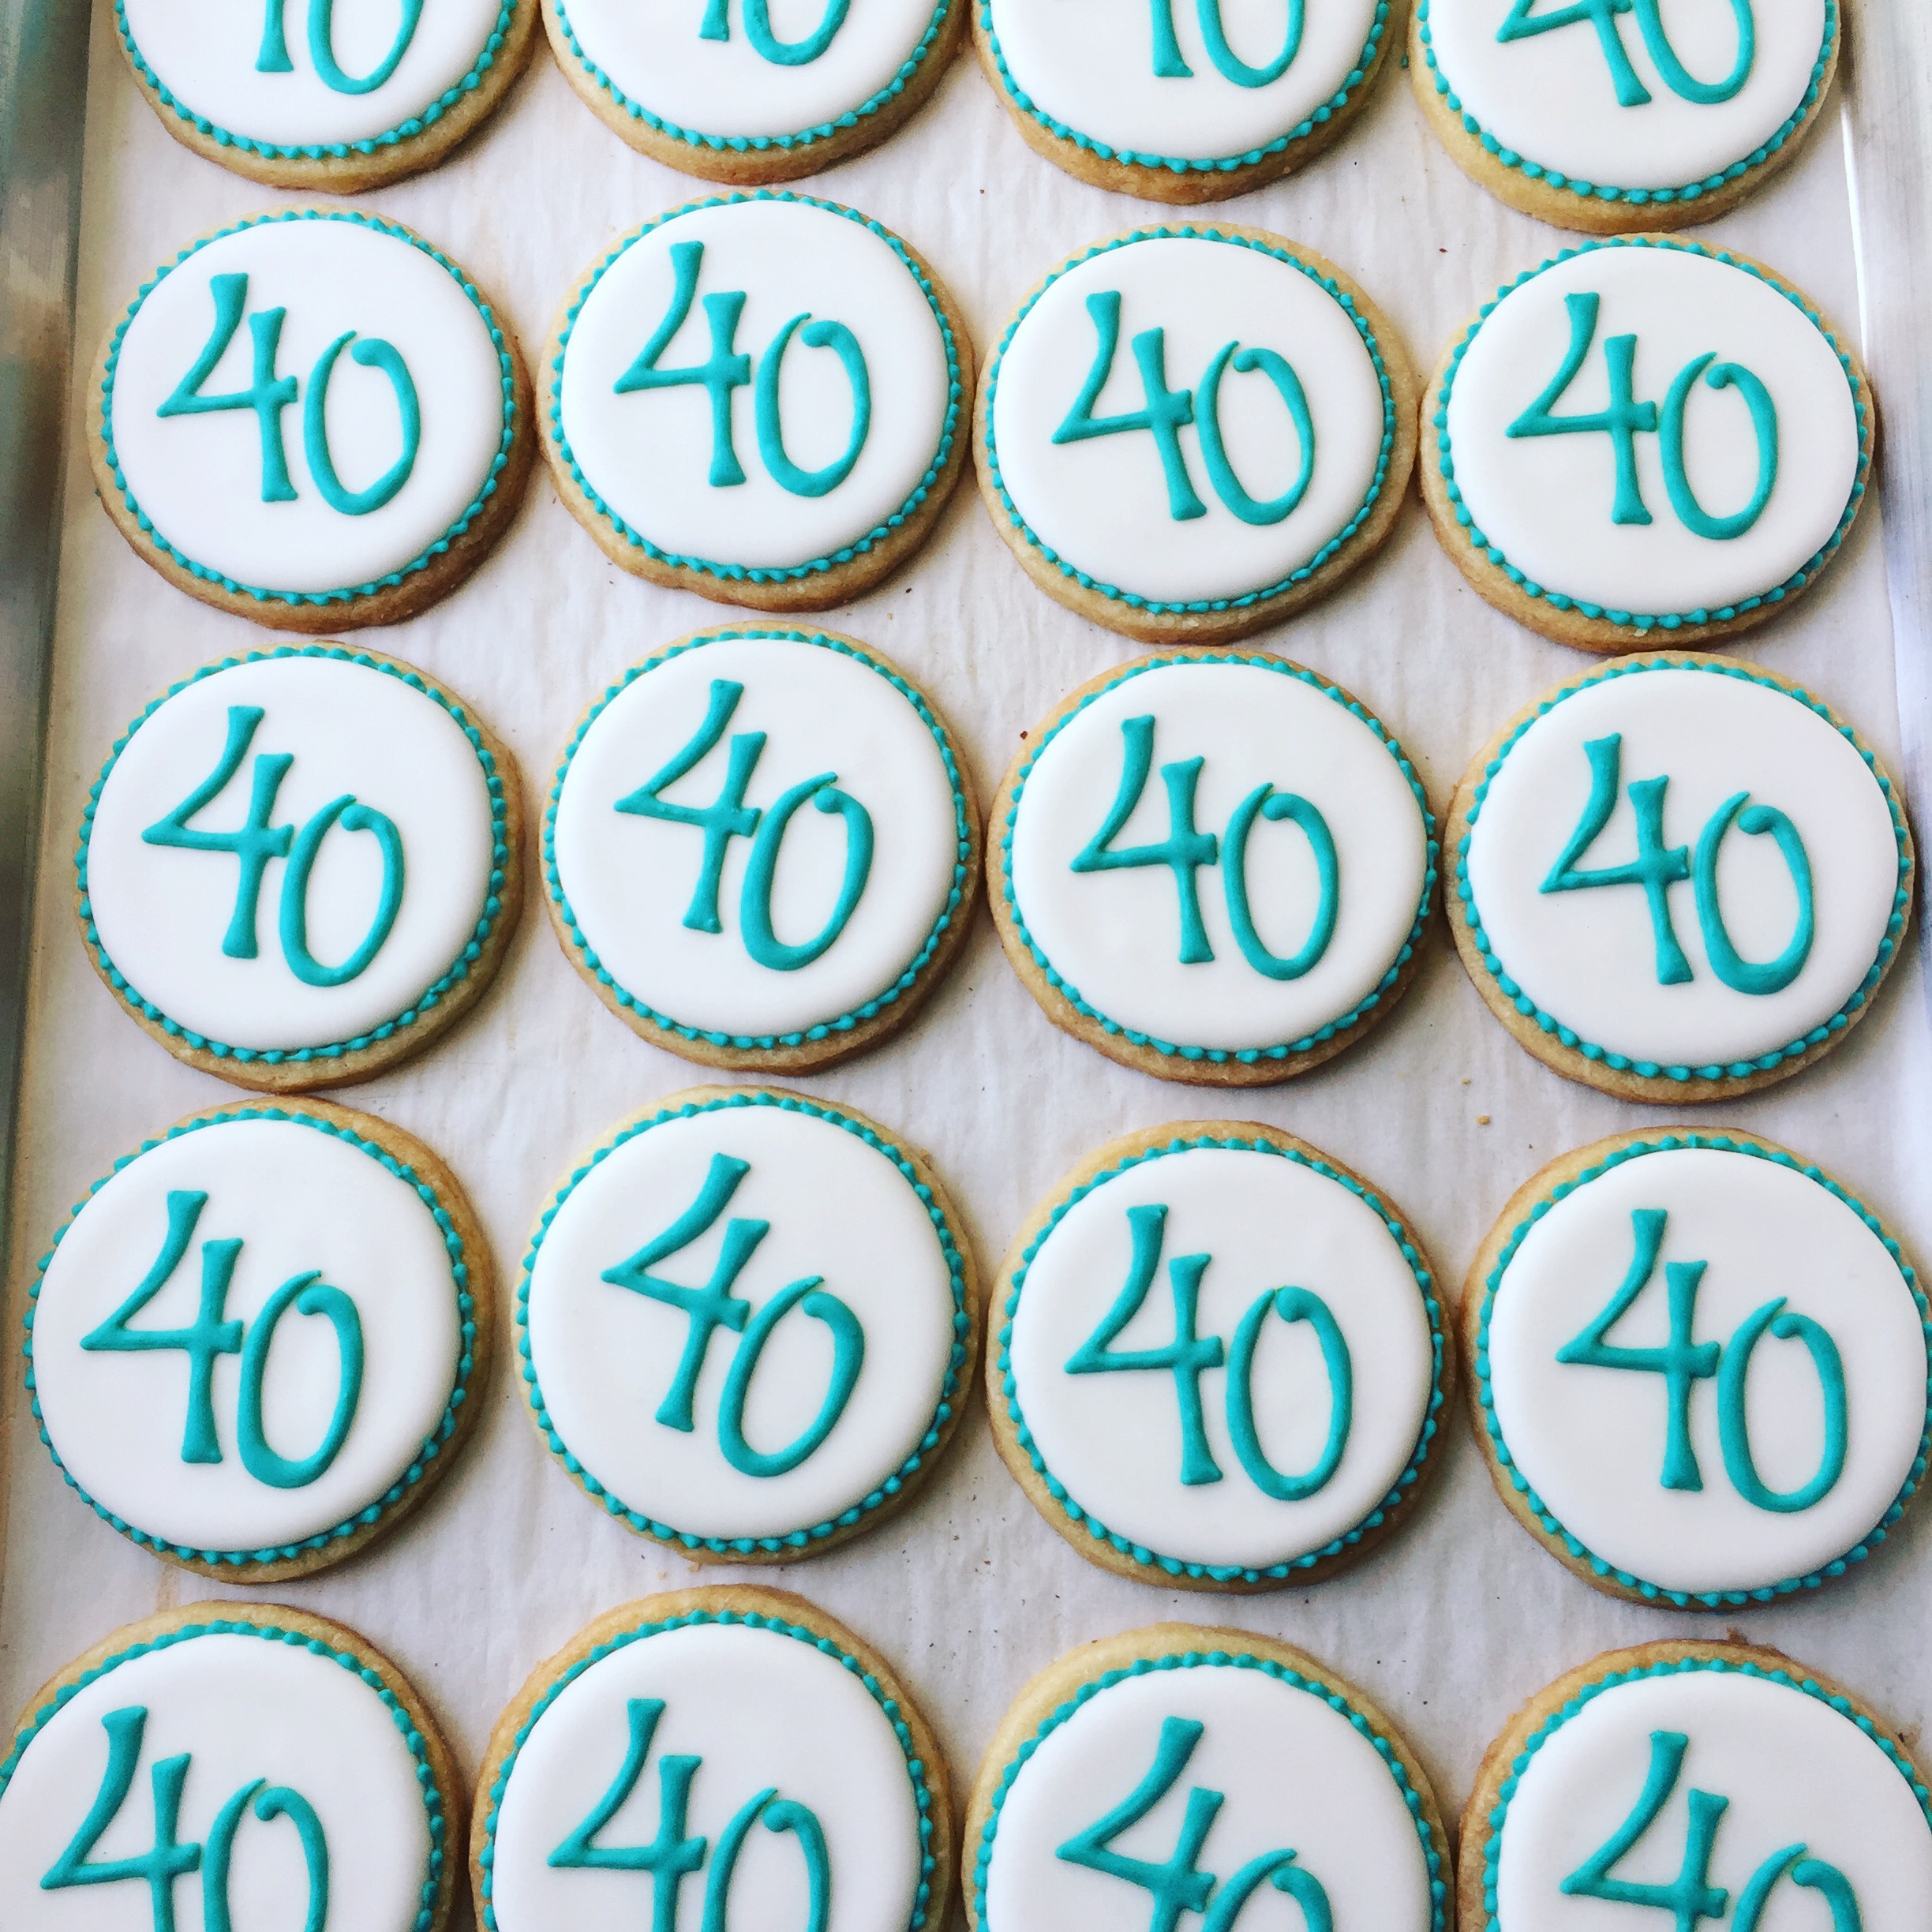 40th birthday party favors